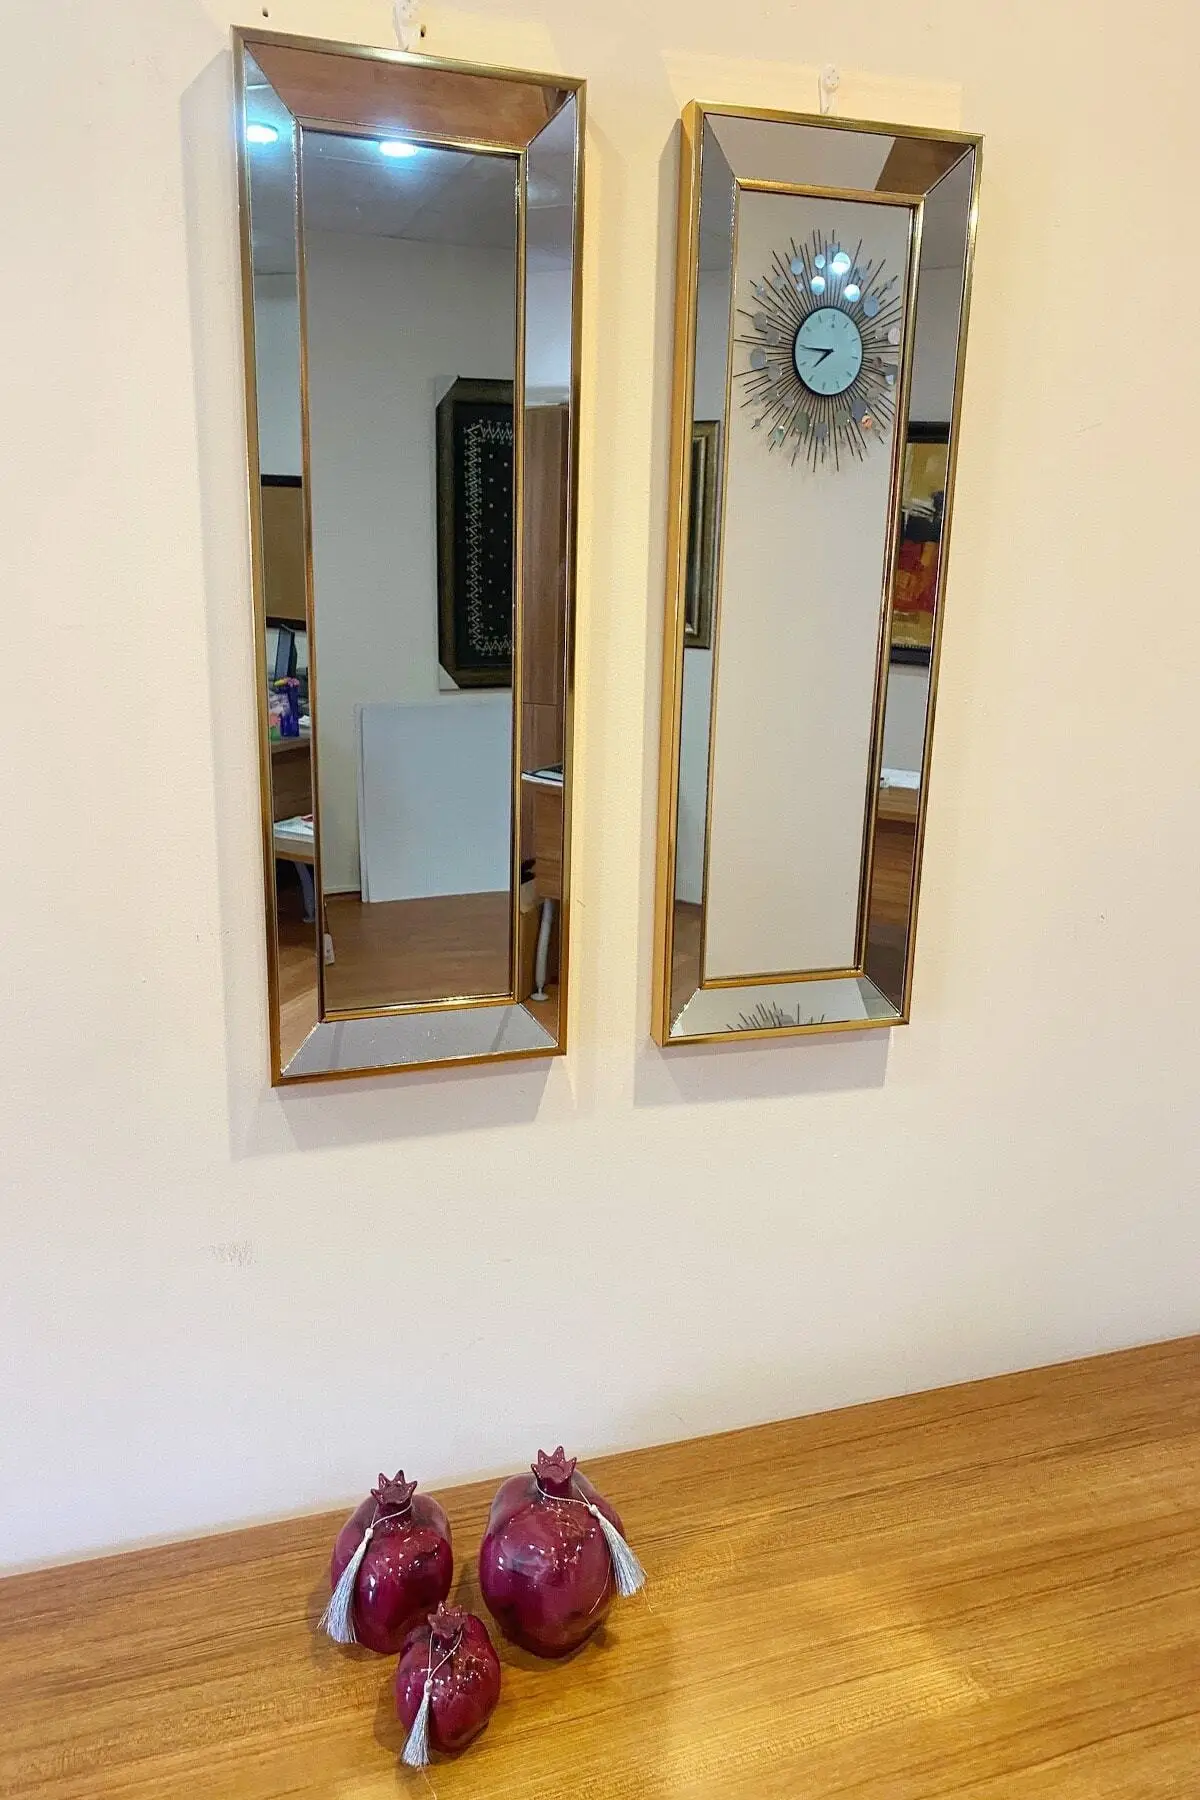 2 Peace Decorative Wall Mirrors Console 30x75 Cm Gold Furniture Full Body Mirror Large Length Decor Bathroom Made from In Turkey